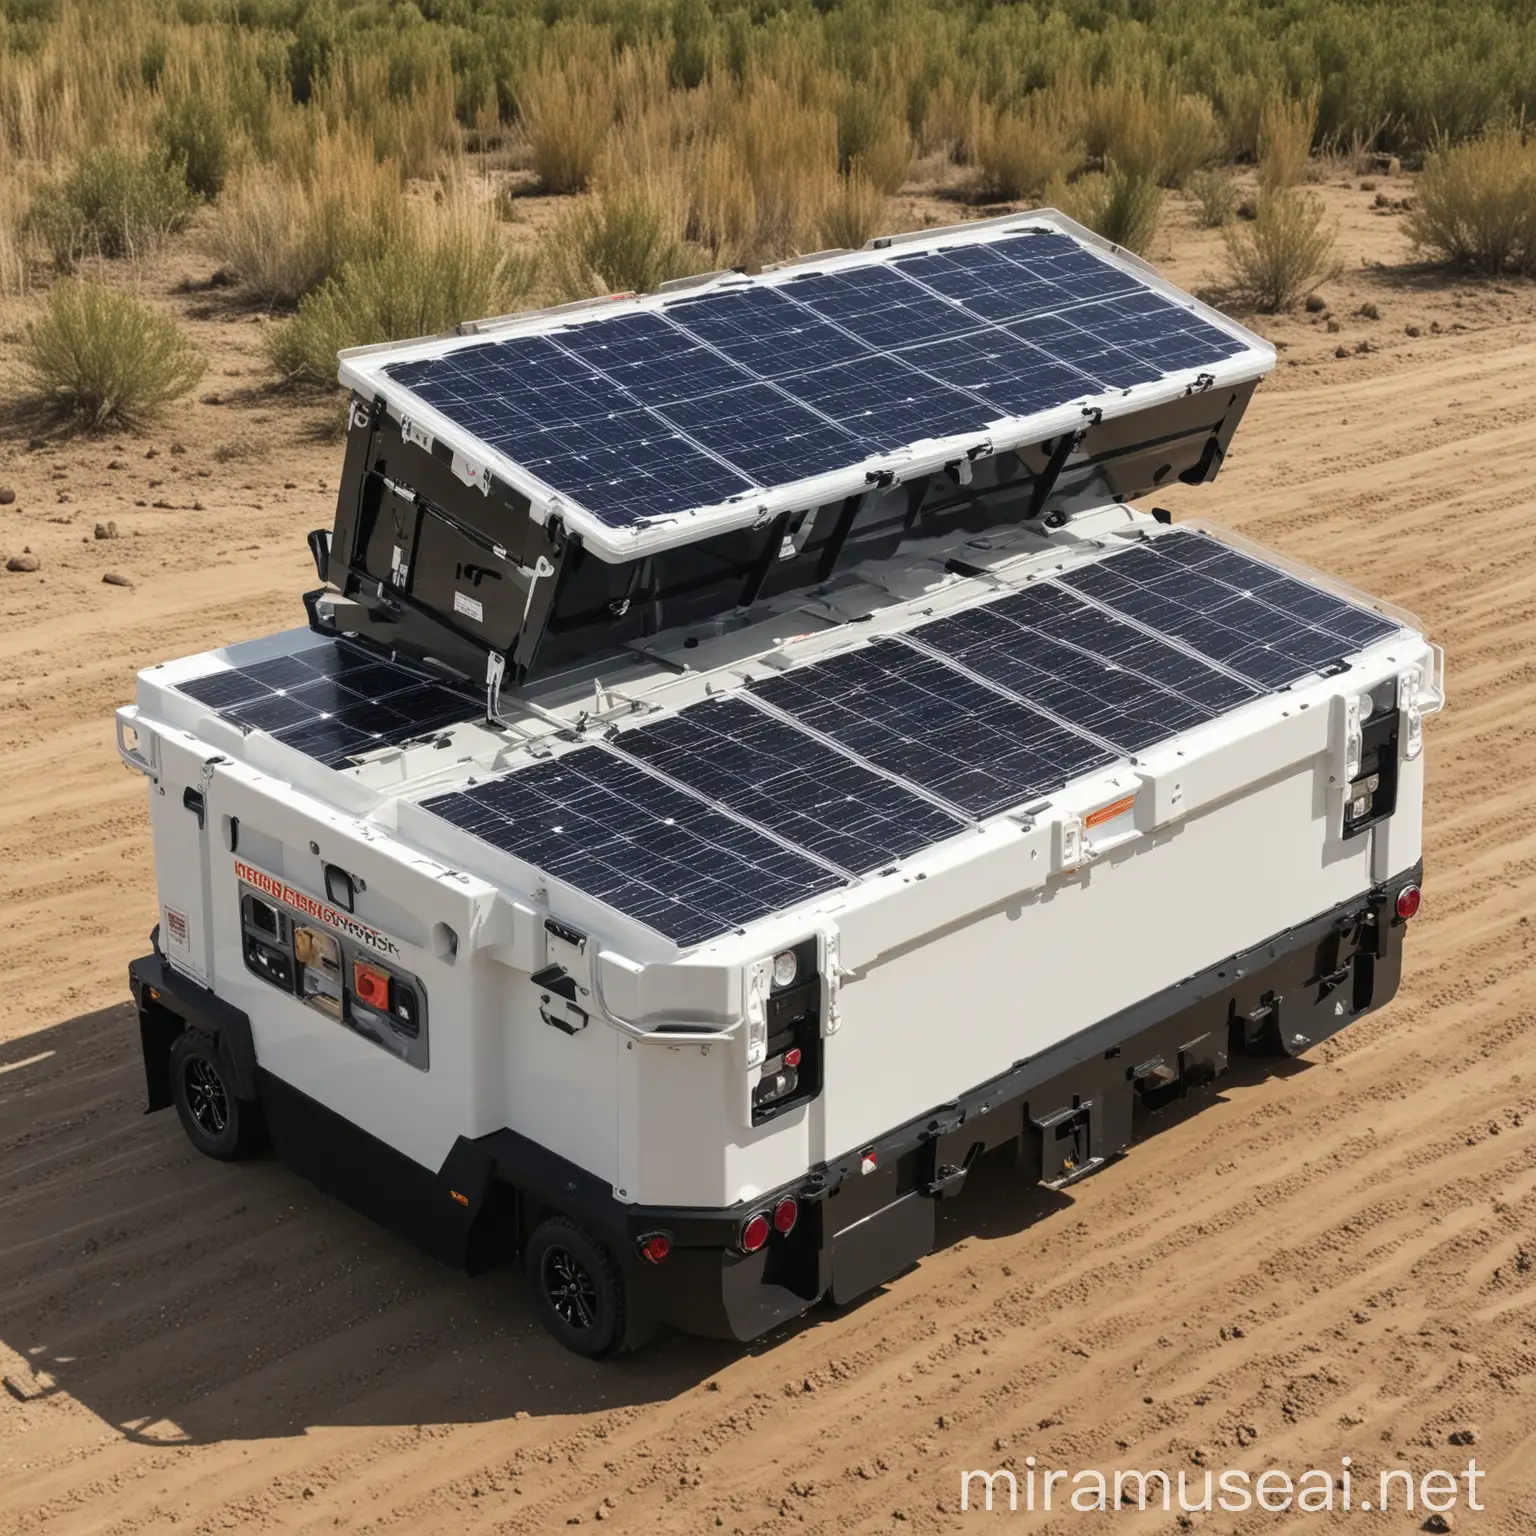 TrailerCon Dry Box with Solar Panels and Portable Storage Batteries